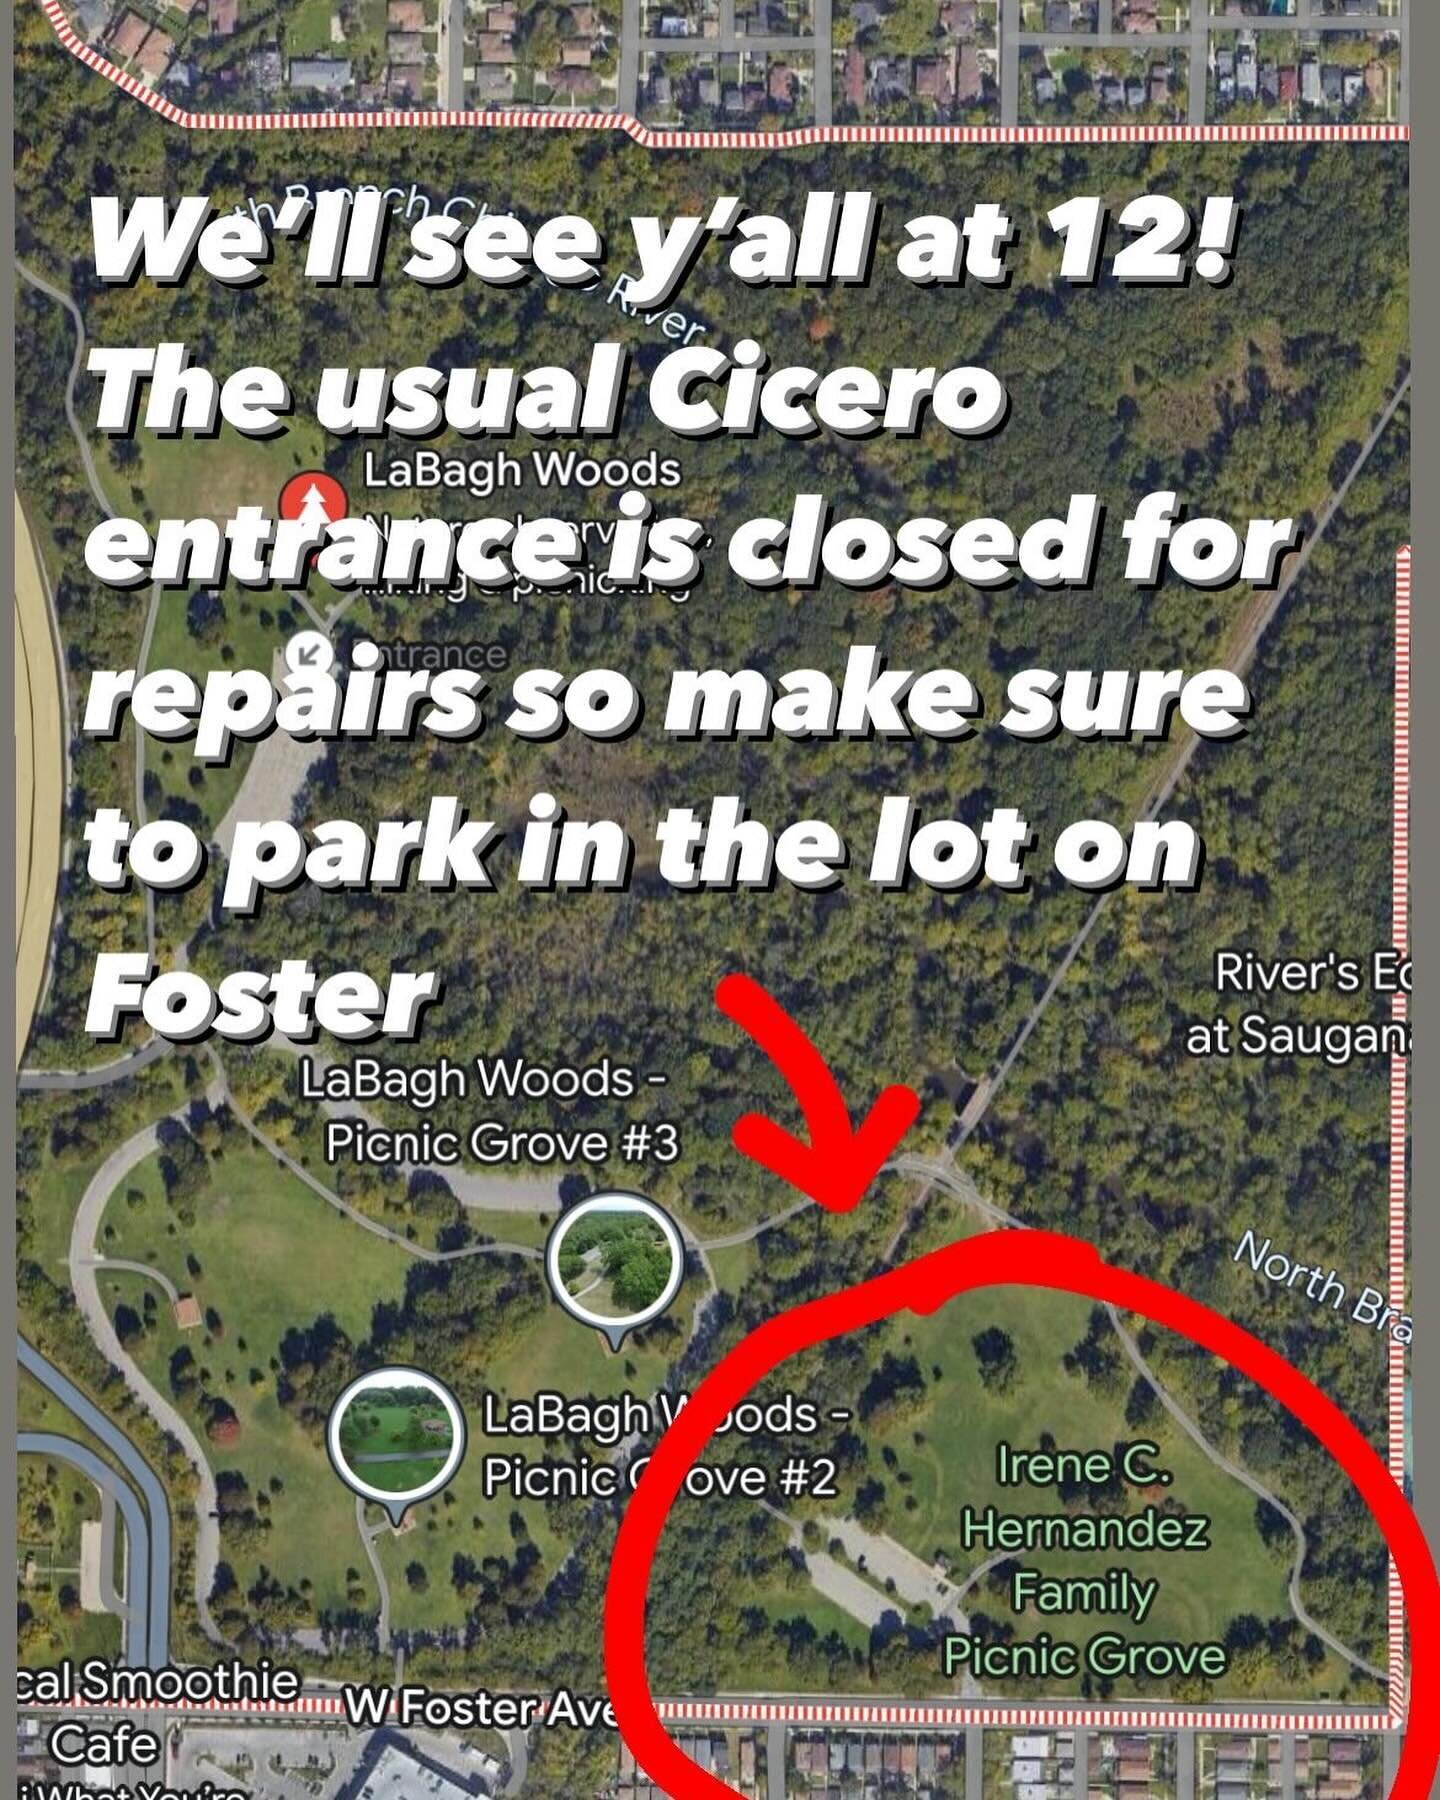 It&rsquo;s outing day!!! 

If driving, remember to park at the foster entrance, as the Cicero lot is closed for water main repairs.

We&rsquo;re so pumped for today, the fungi have been flourishing after the rain and recent warmer weather. It might b